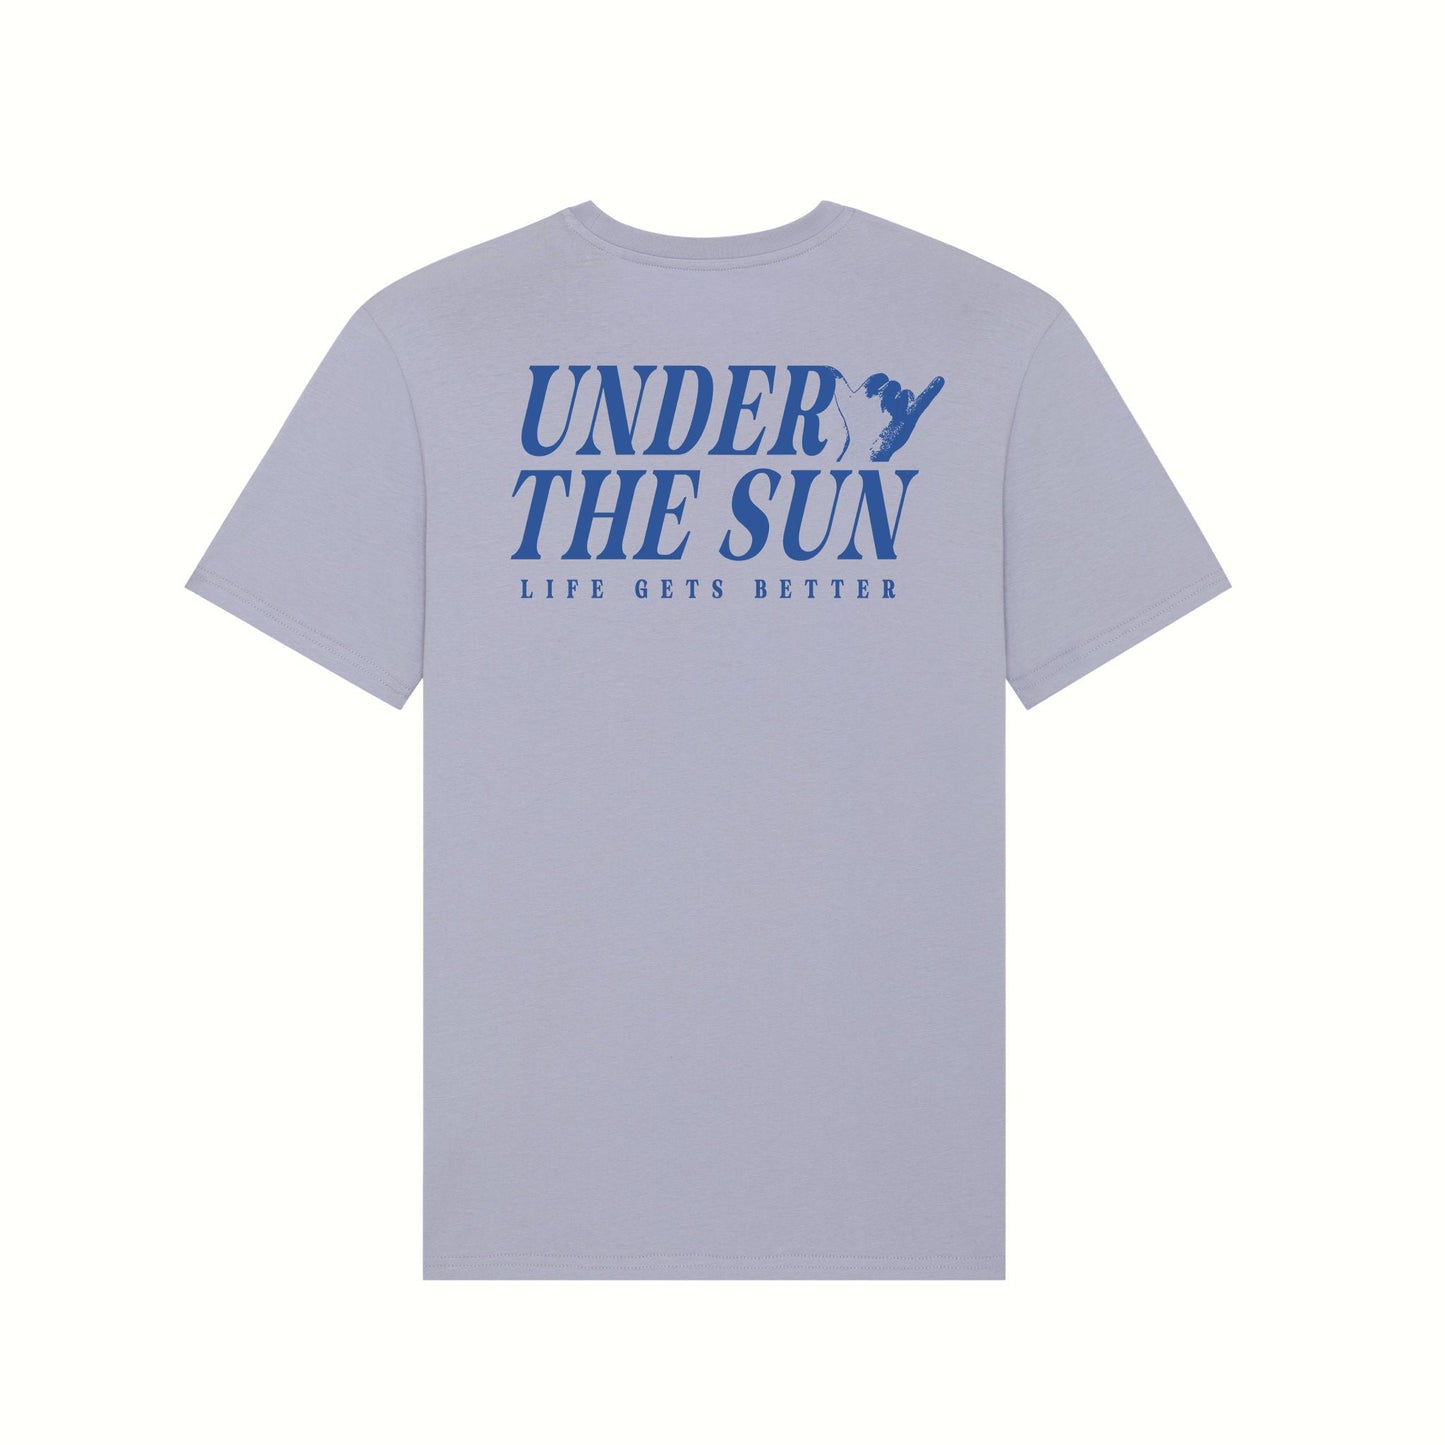 Fear The Ordinary lavender premium organic cotton t-shirt with blue cobalt under the sun summer inspired back print.